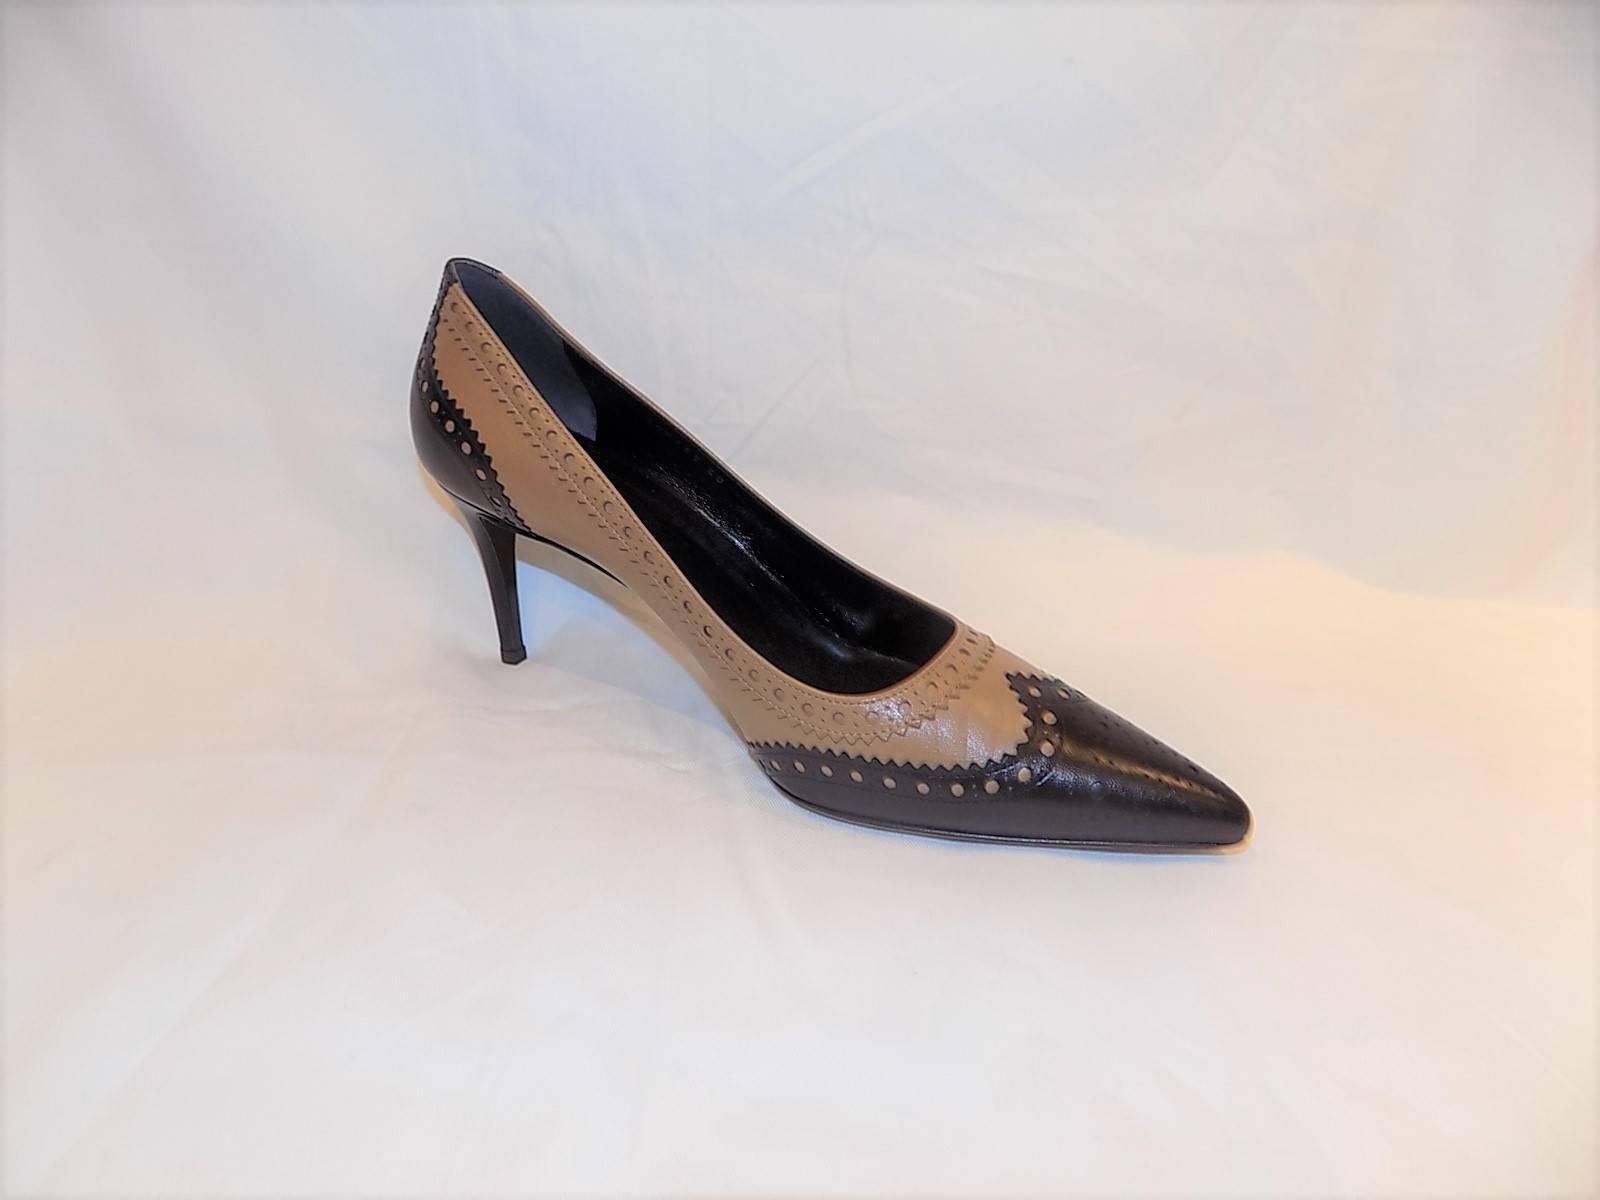 Fabulous Gucci New pointy toe spectator pump. Lite brown and black leather. Slim 3